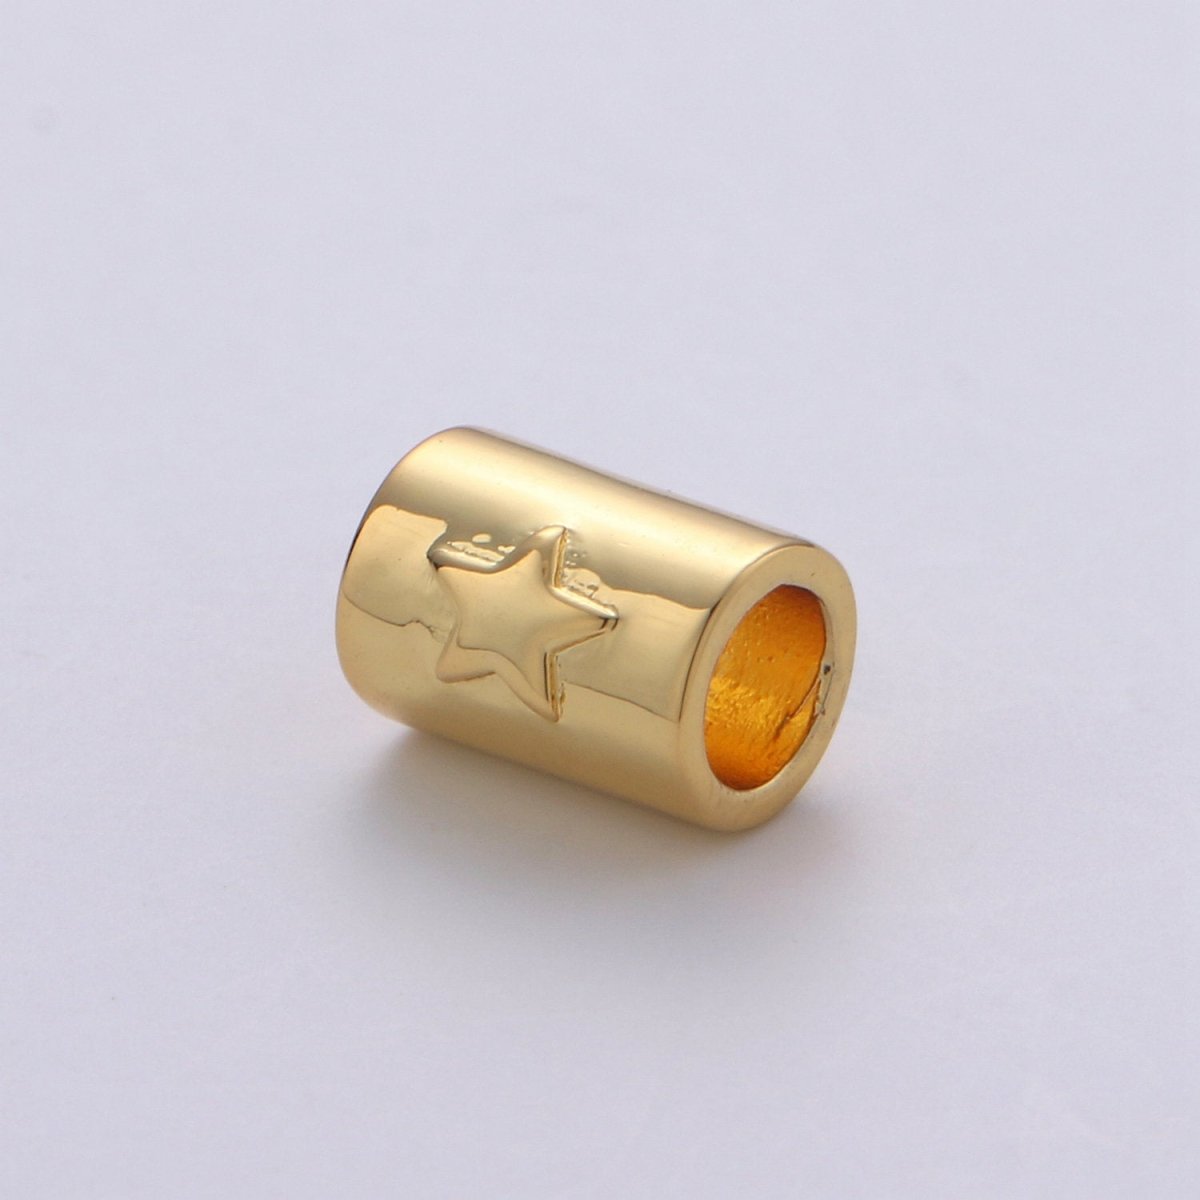 7x9mm Bead CZ Gold Beads Star Beads cylinder Beads Charm for Bracelet Necklace Supply 4mm hole B-323 - DLUXCA